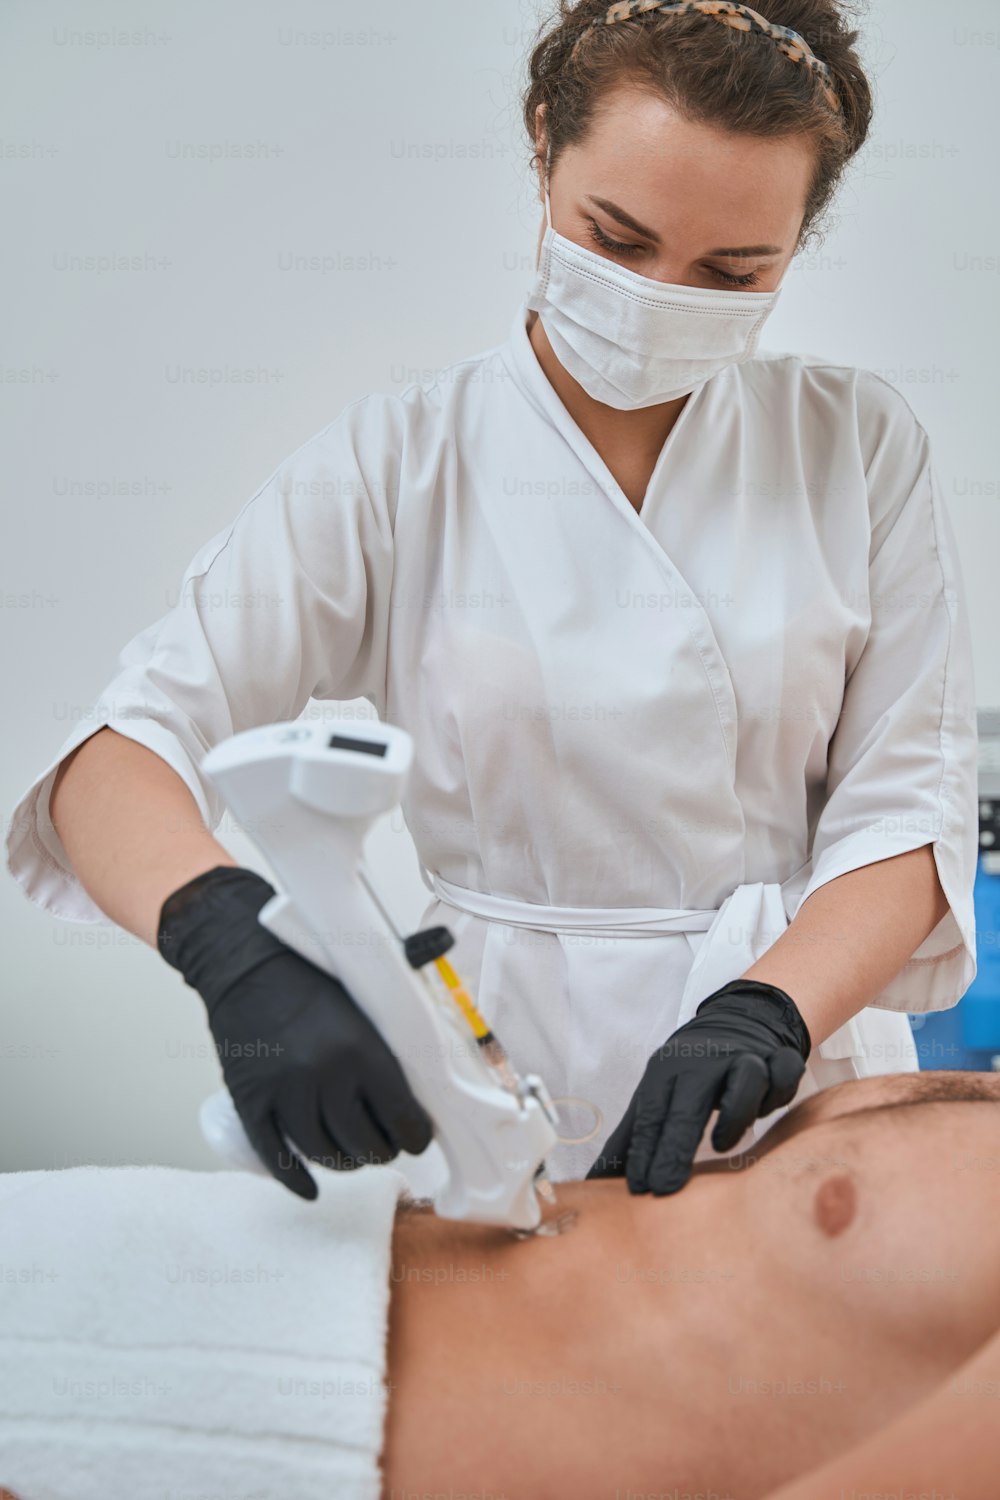 Focused dermatologist in a face mask and nitrile gloves injecting a male patient into the abdomen with an injection device